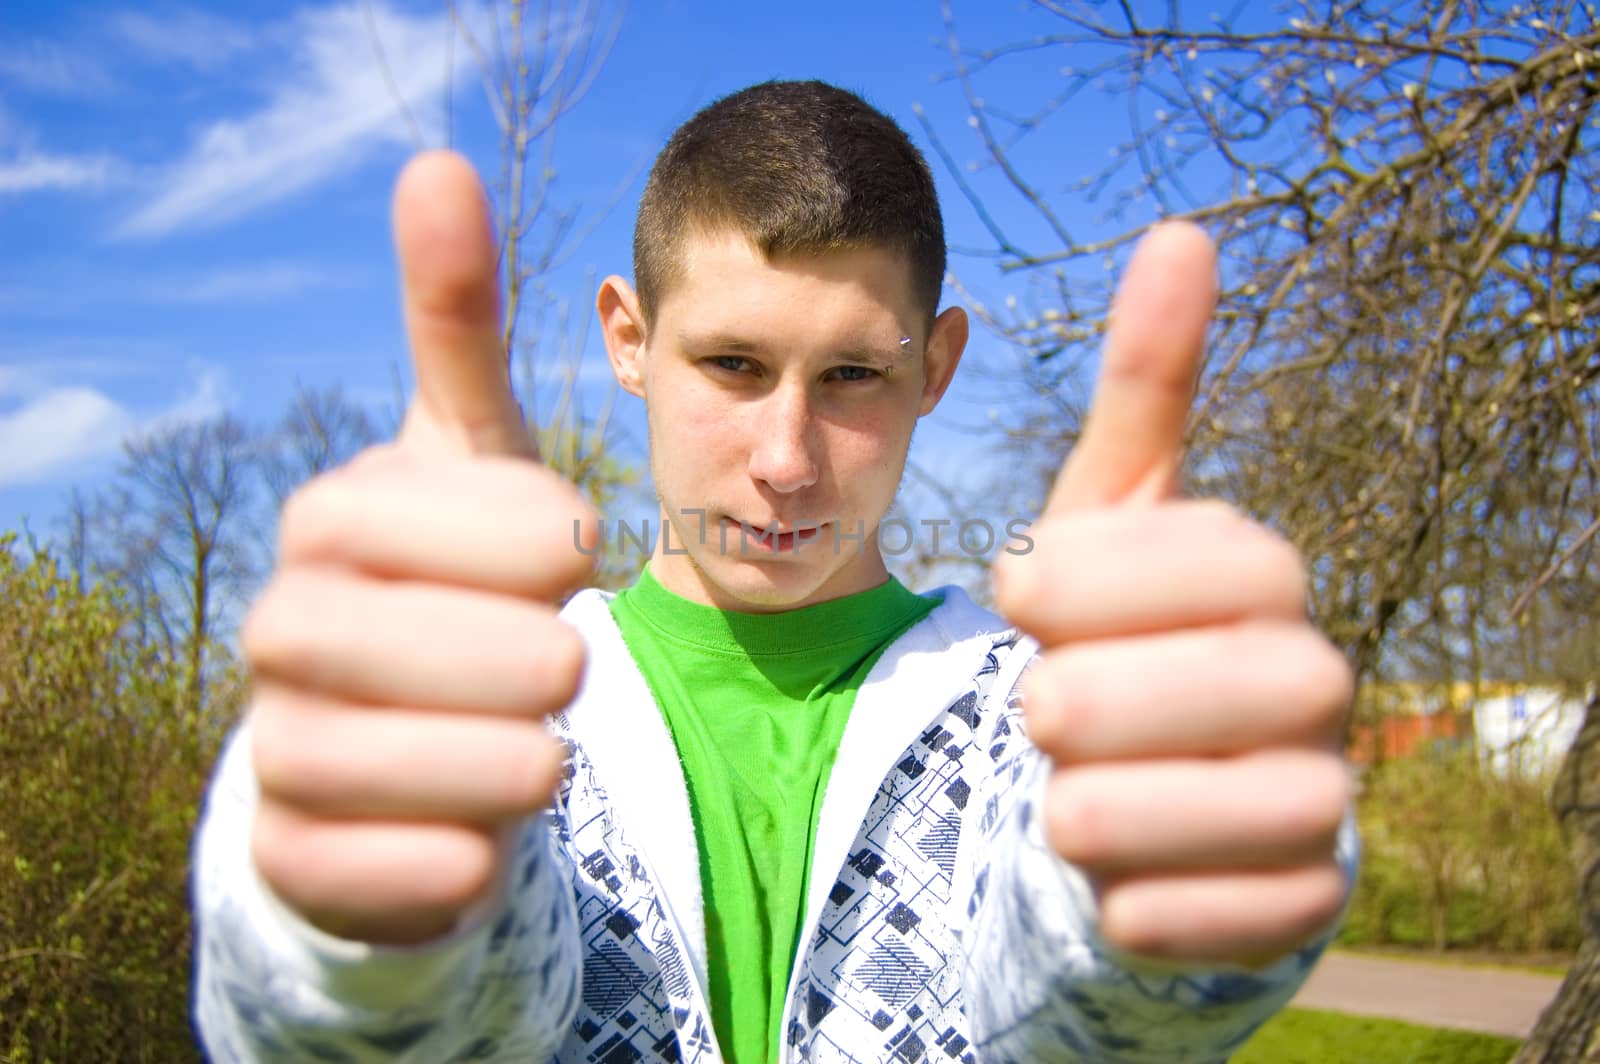 Teenager conceptual image. Teenager giving the thumbs-up signs.